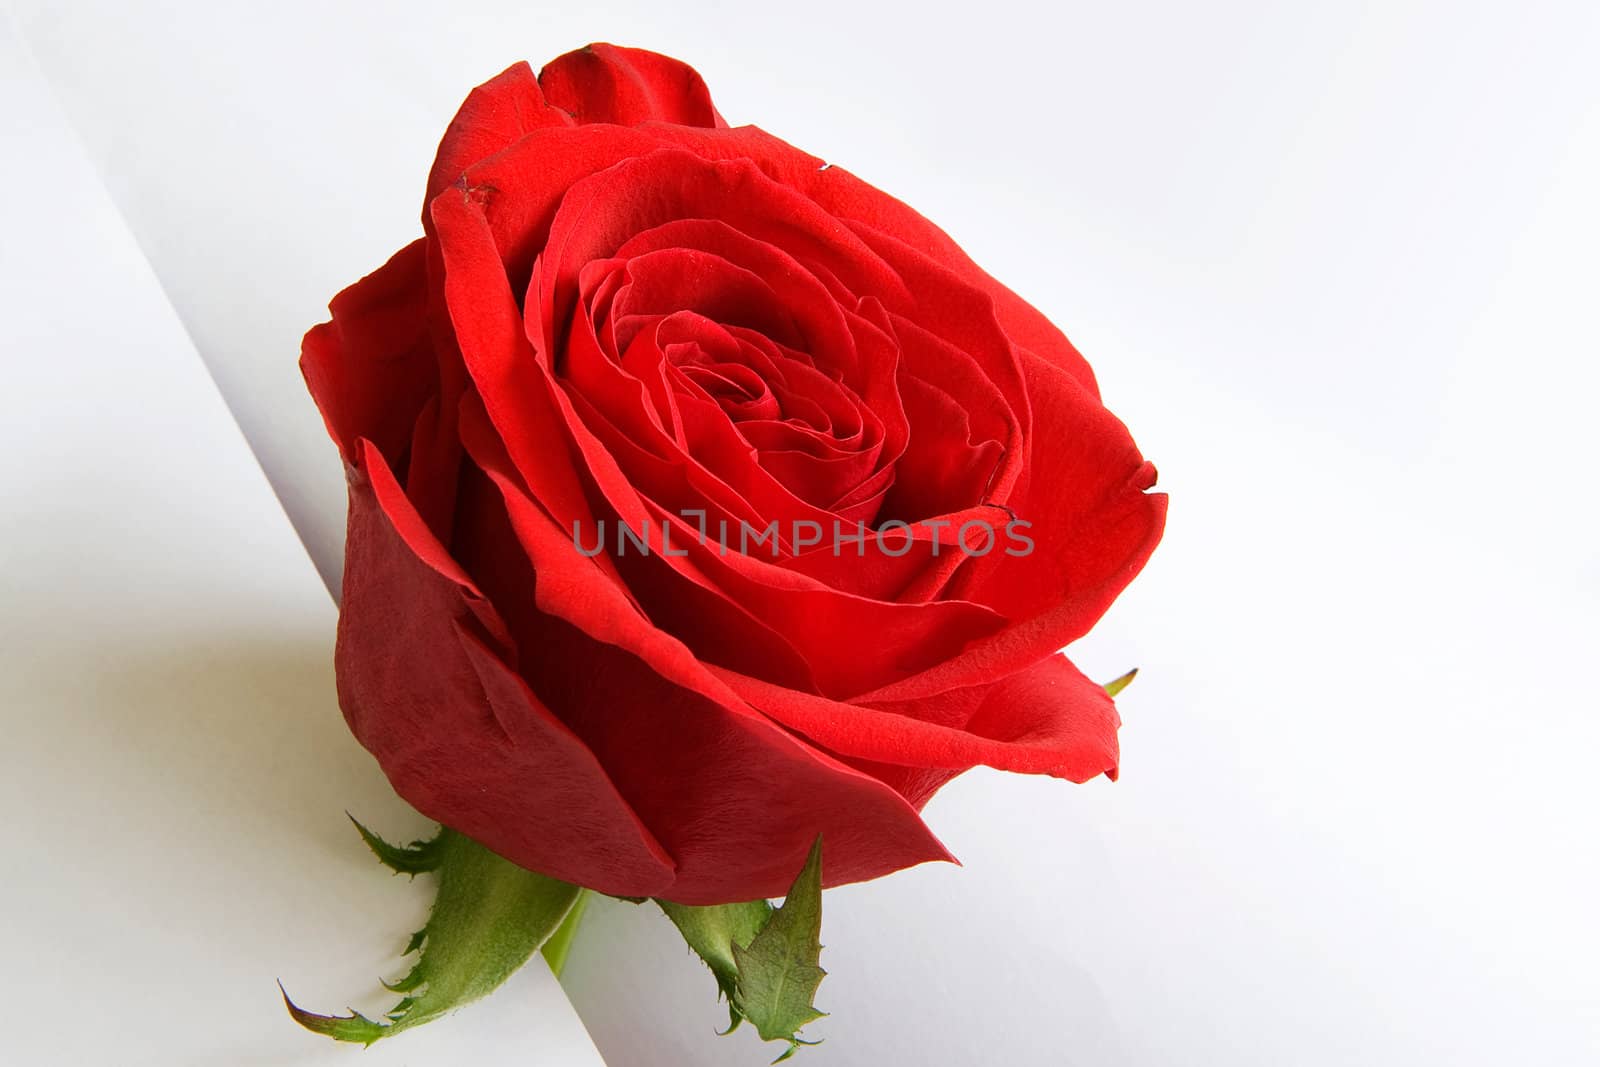 Red rose on white paper